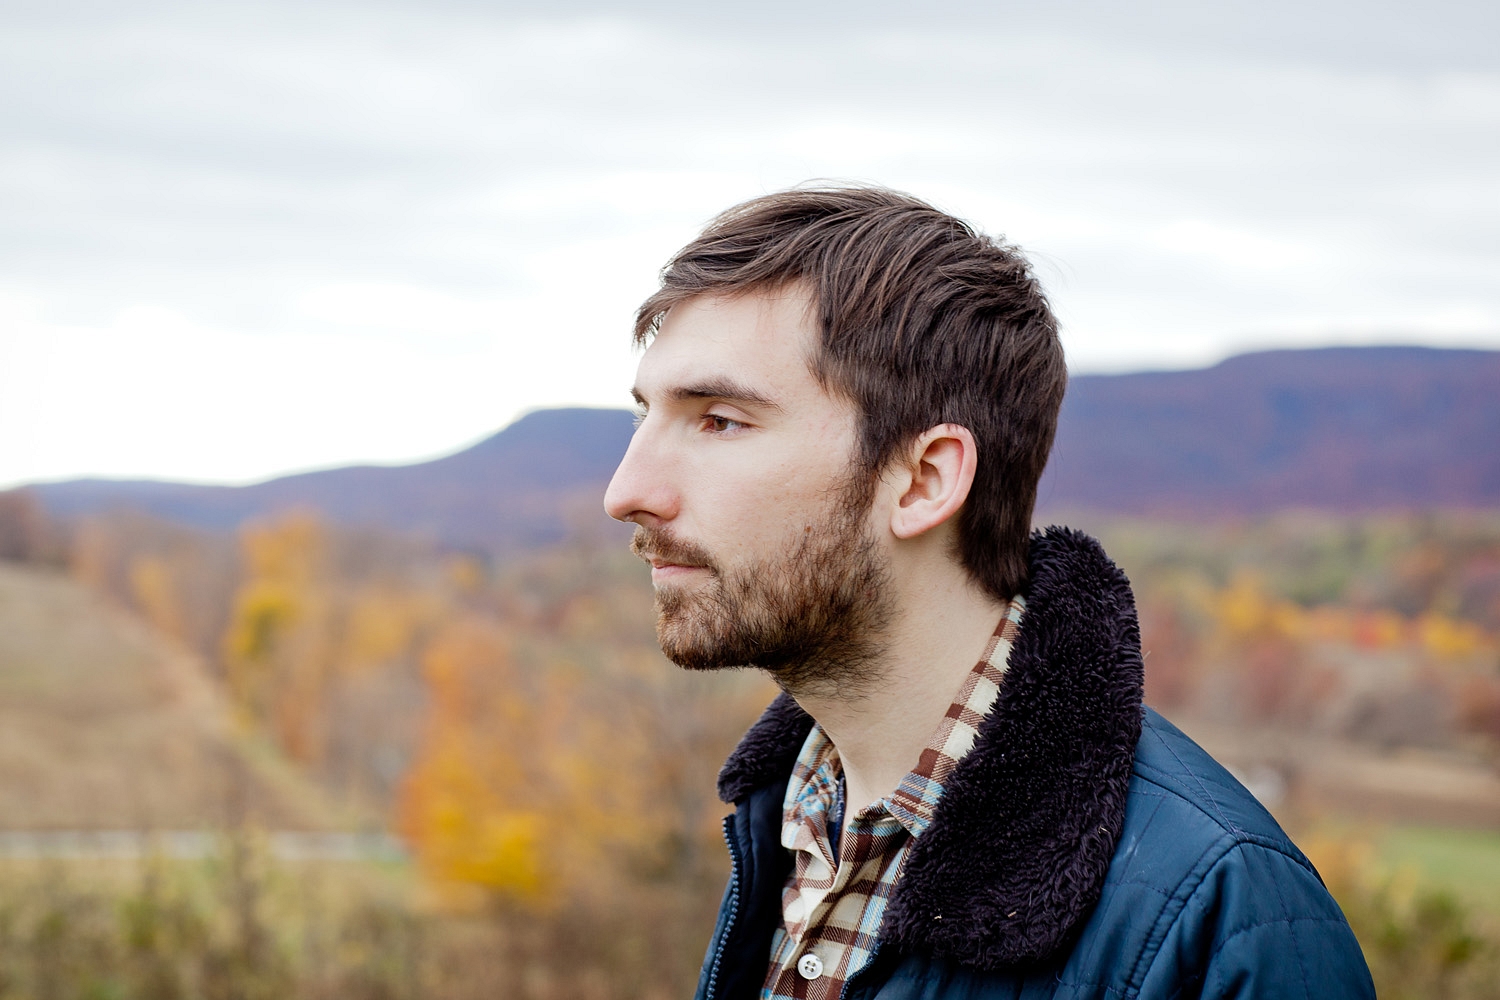 Mutual Benefit shares new track ‘Not For Nothing’